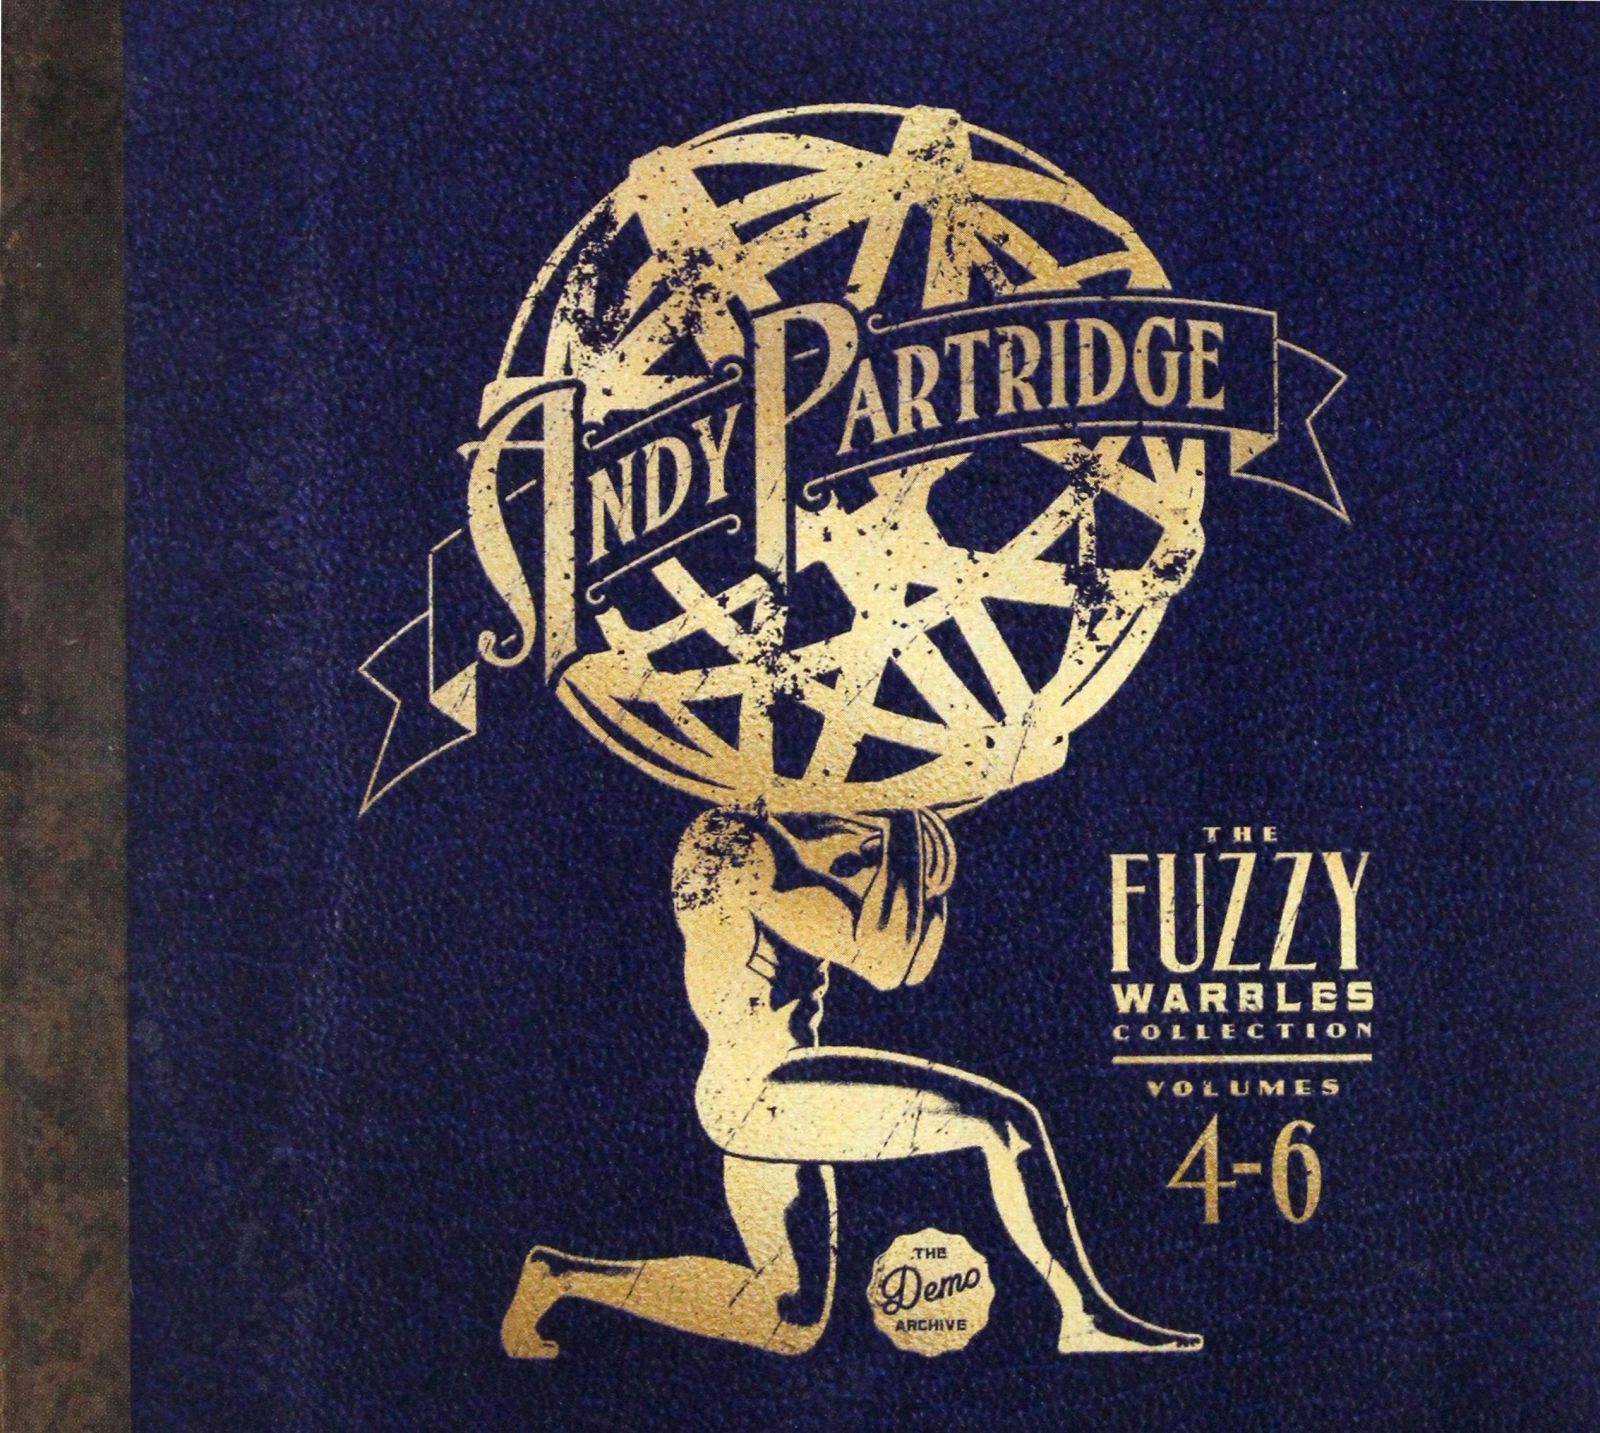 ANDY PARTRIDGE: THE FUZZY WARBLES COLLECTION VOLUMES 4-6 [3CD]